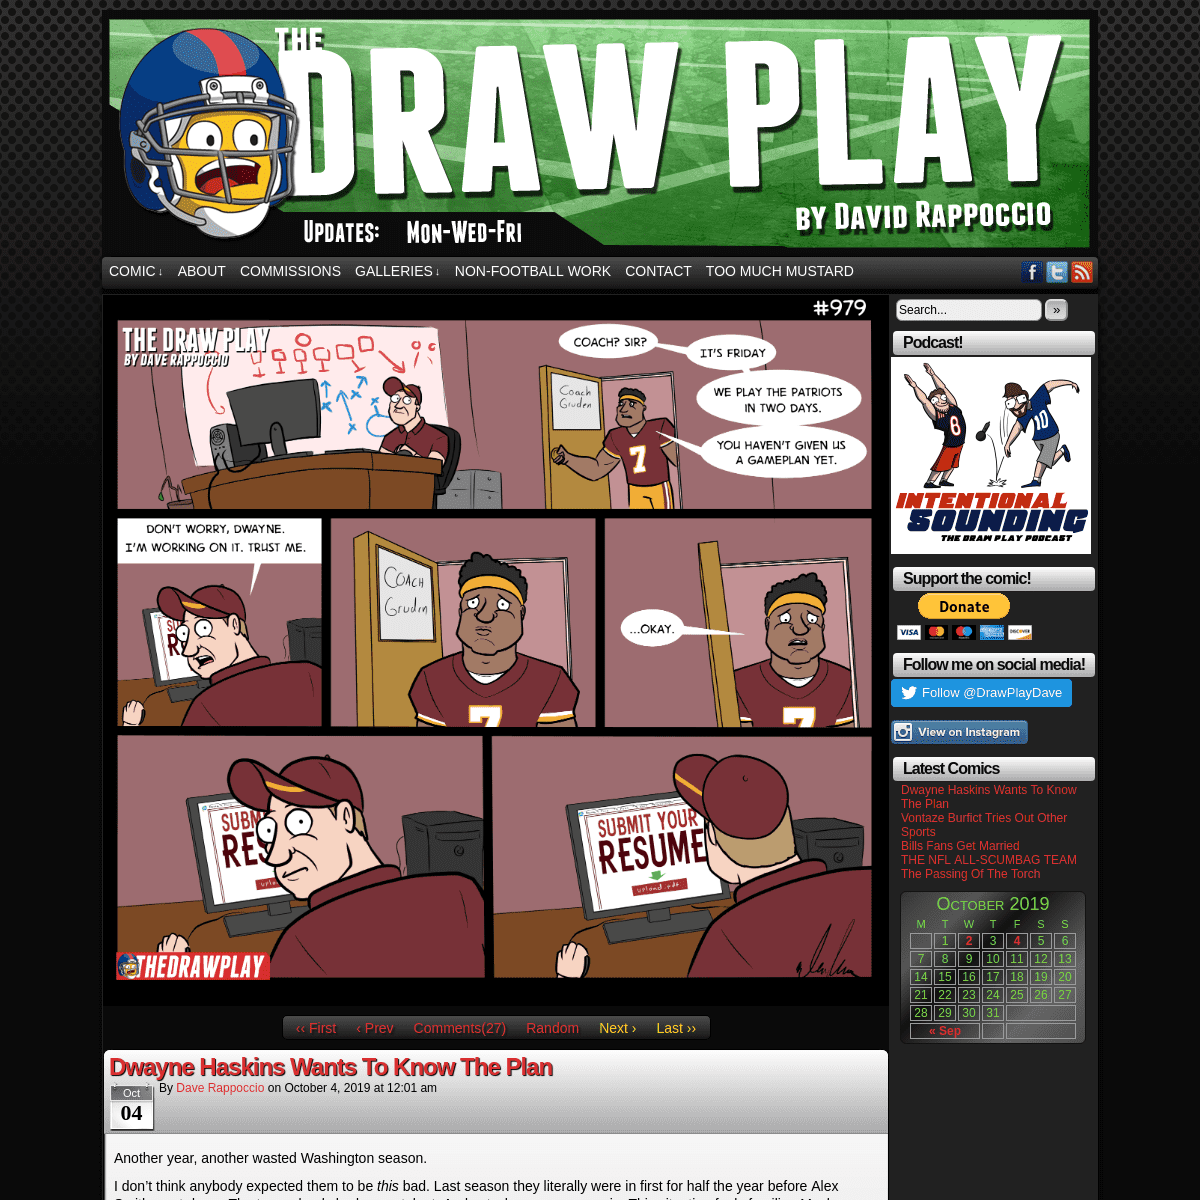 The Draw Play - A football comic by Dave Rappoccio